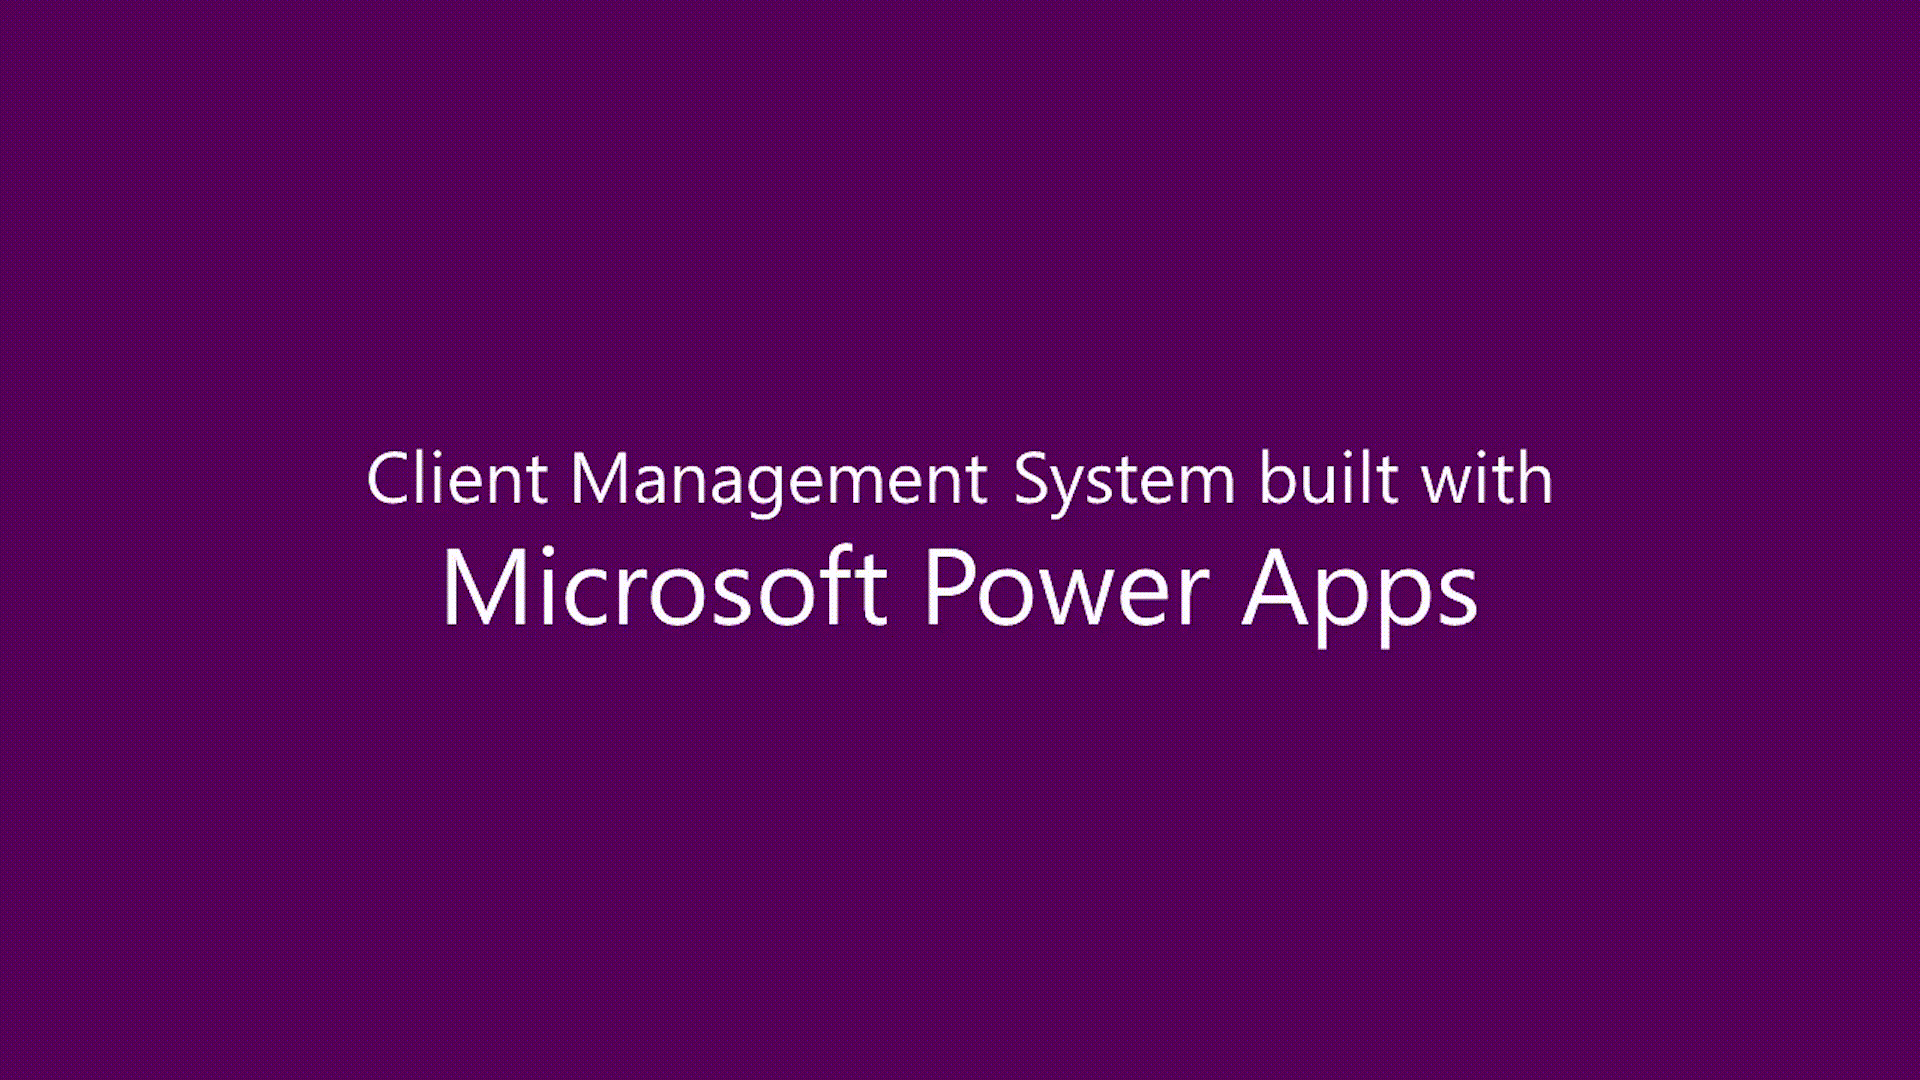 Animated GIF demo of Power Apps model-driven app